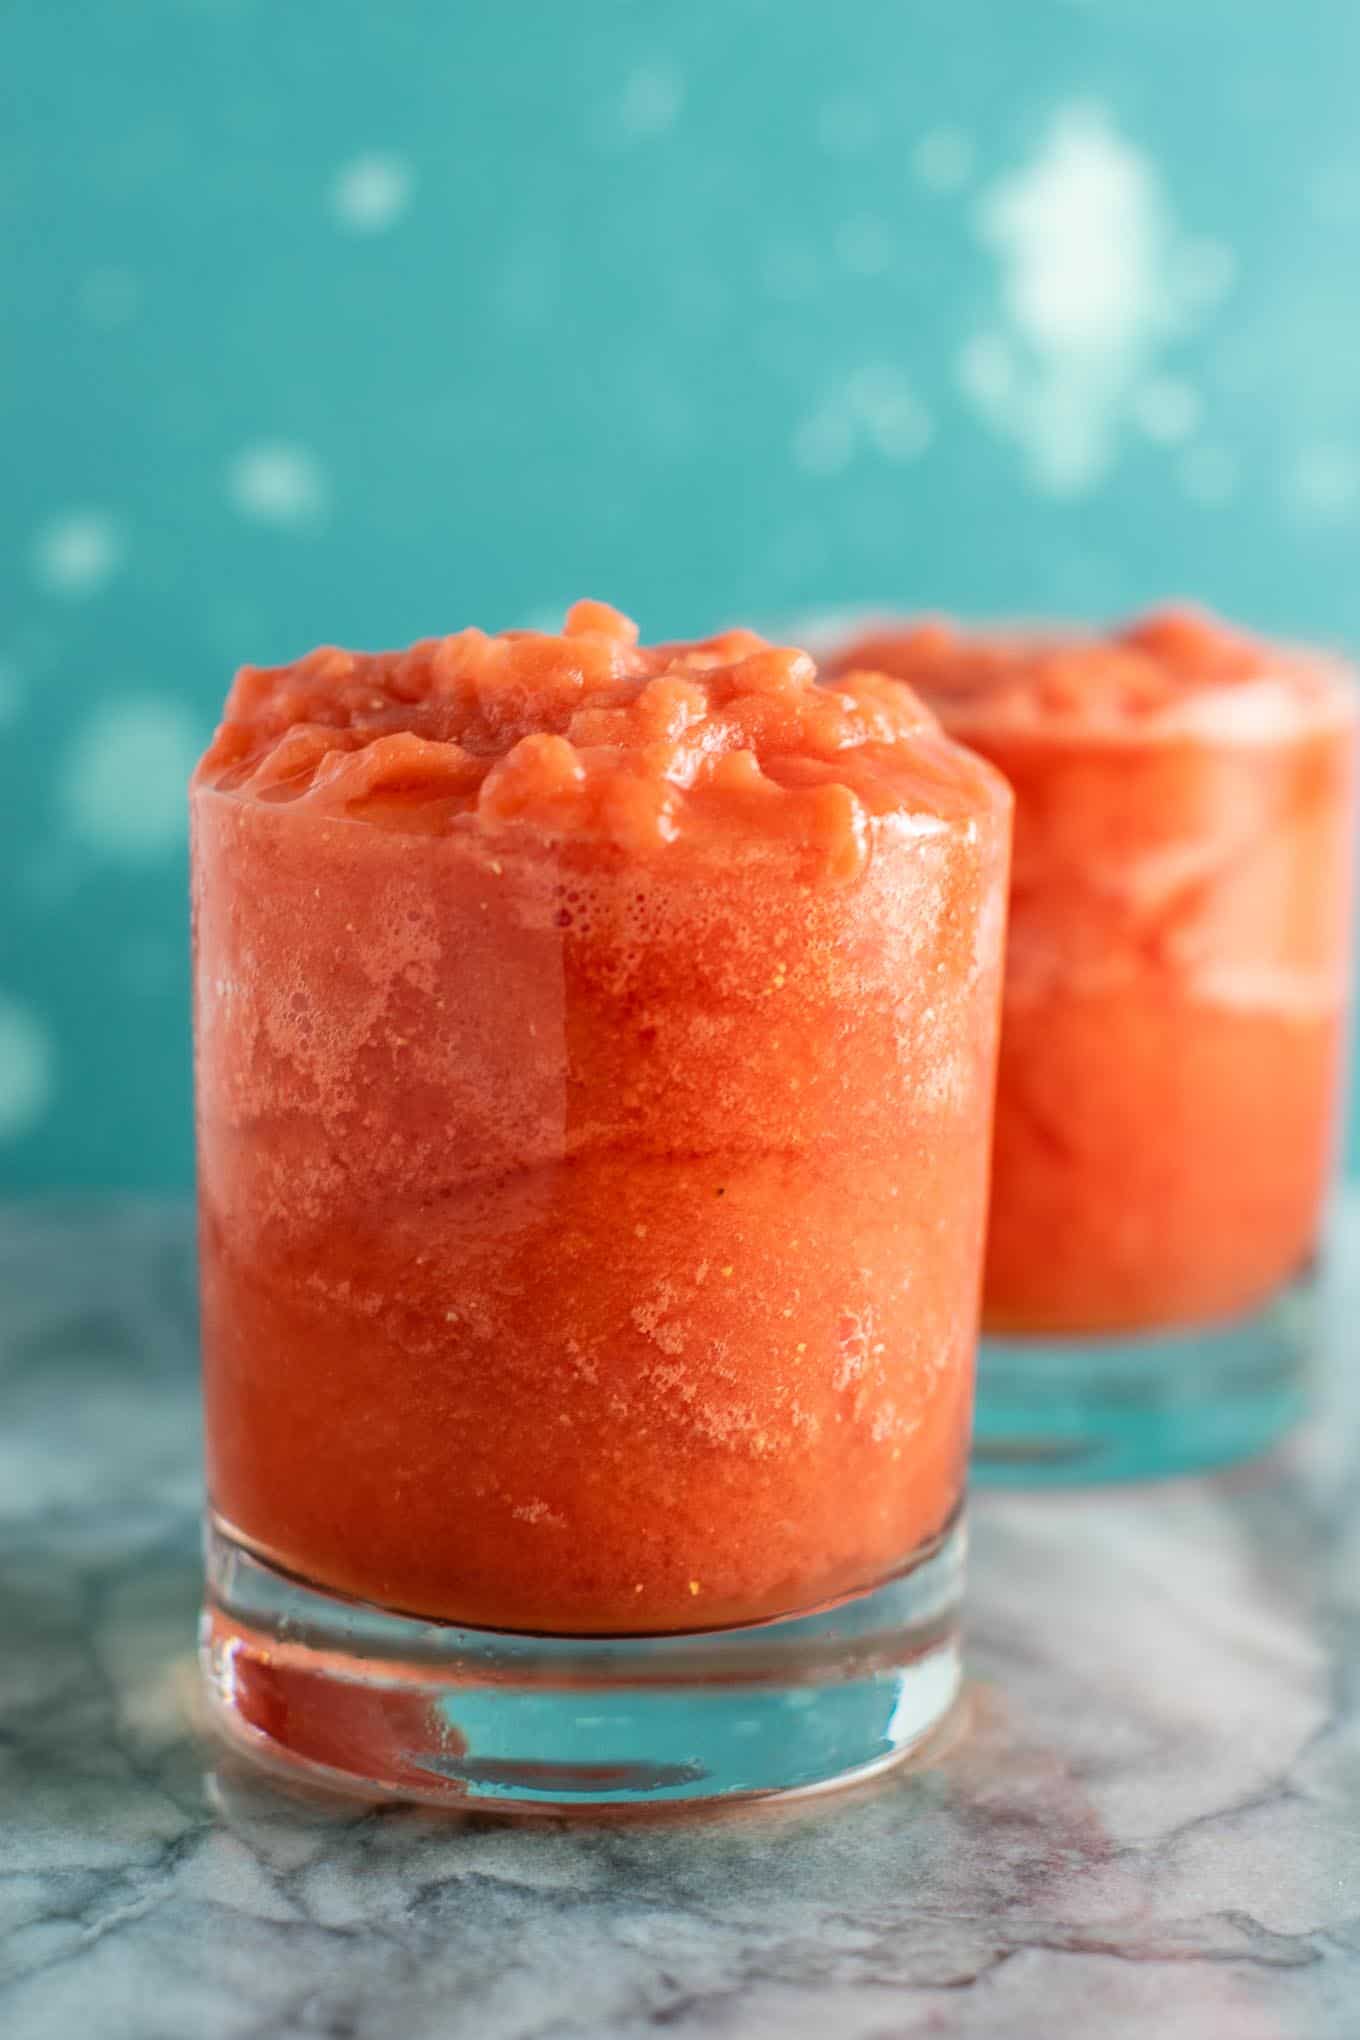 Frozen watermelon drink – healthy and refreshing summer drink! Made with just fresh lime, frozen watermelon, coconut water, and pure maple syurp. #frozenwatermelon #watermelondrink #summerdrink #healthy #coconutwater #lime #watermelonlime